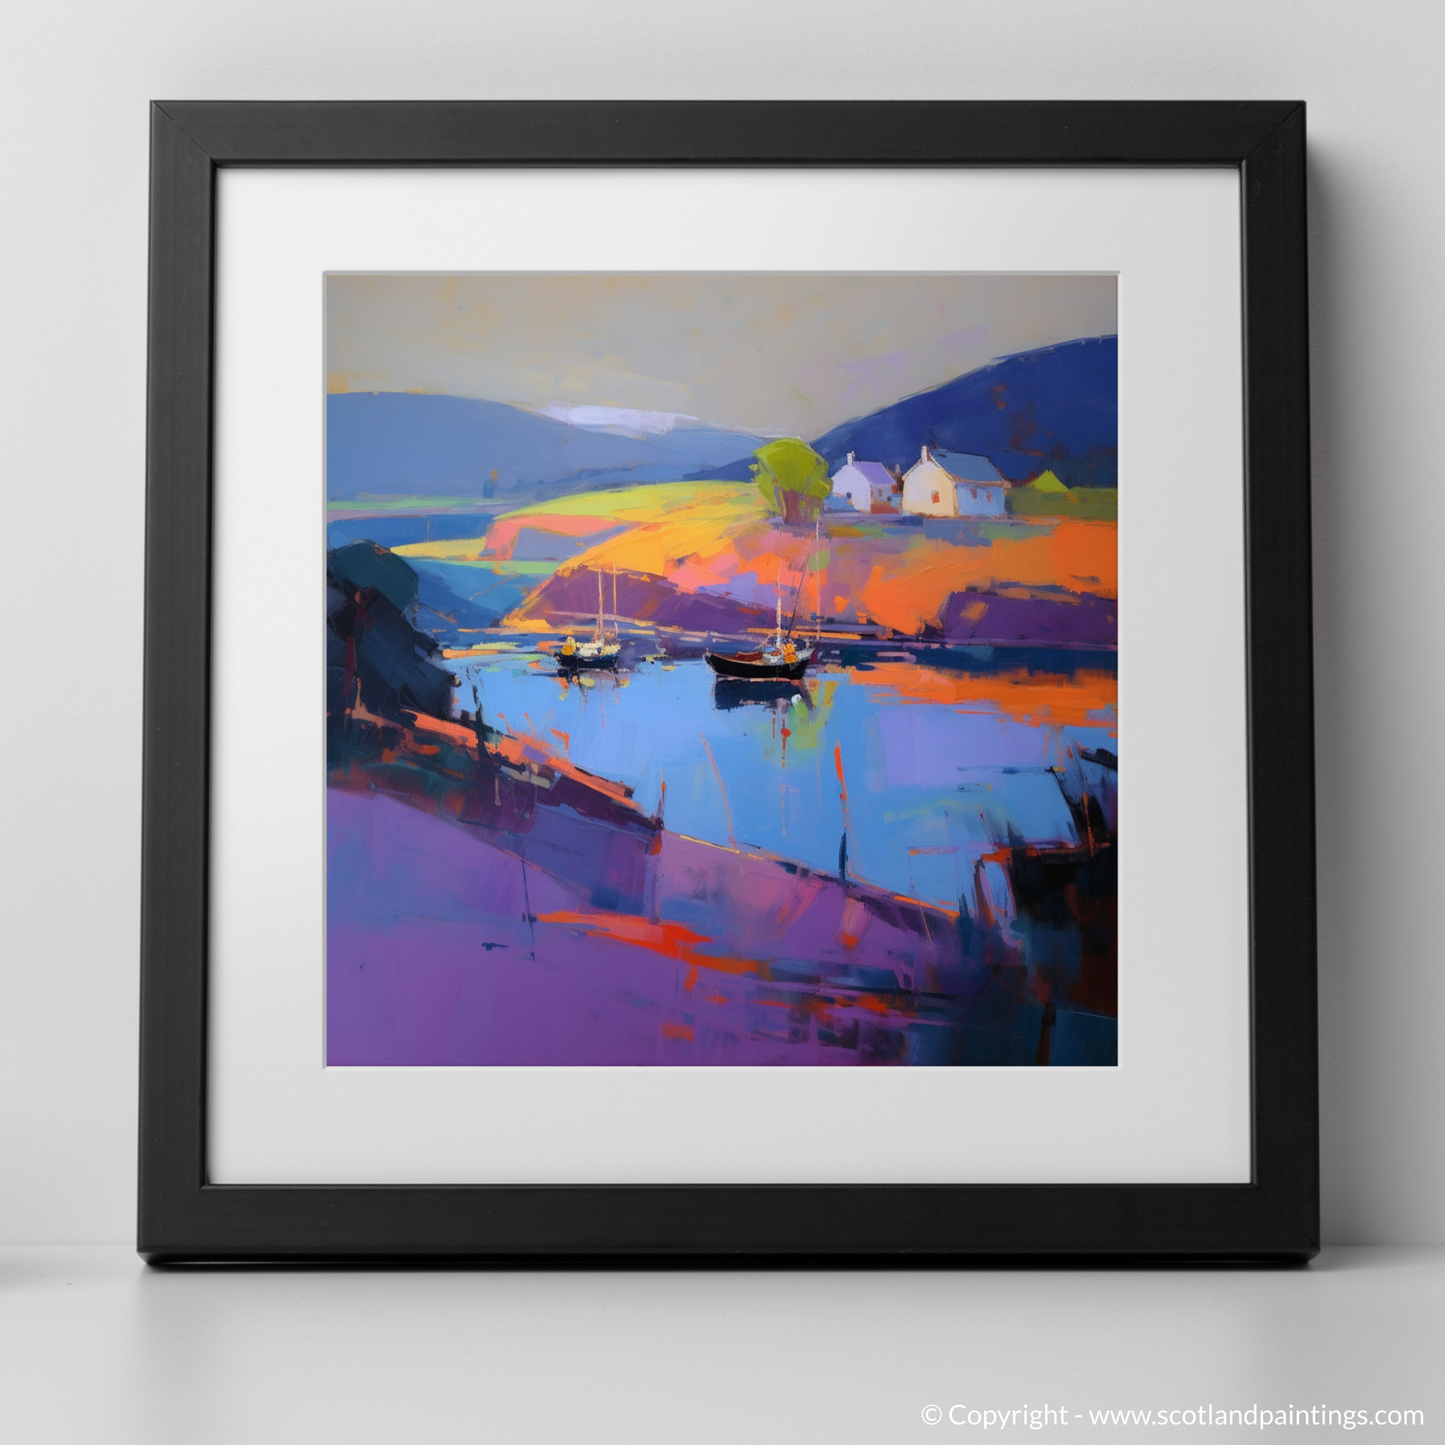 Dusk over Findochty Harbour: An Expressionist Ode to Scottish Tranquility